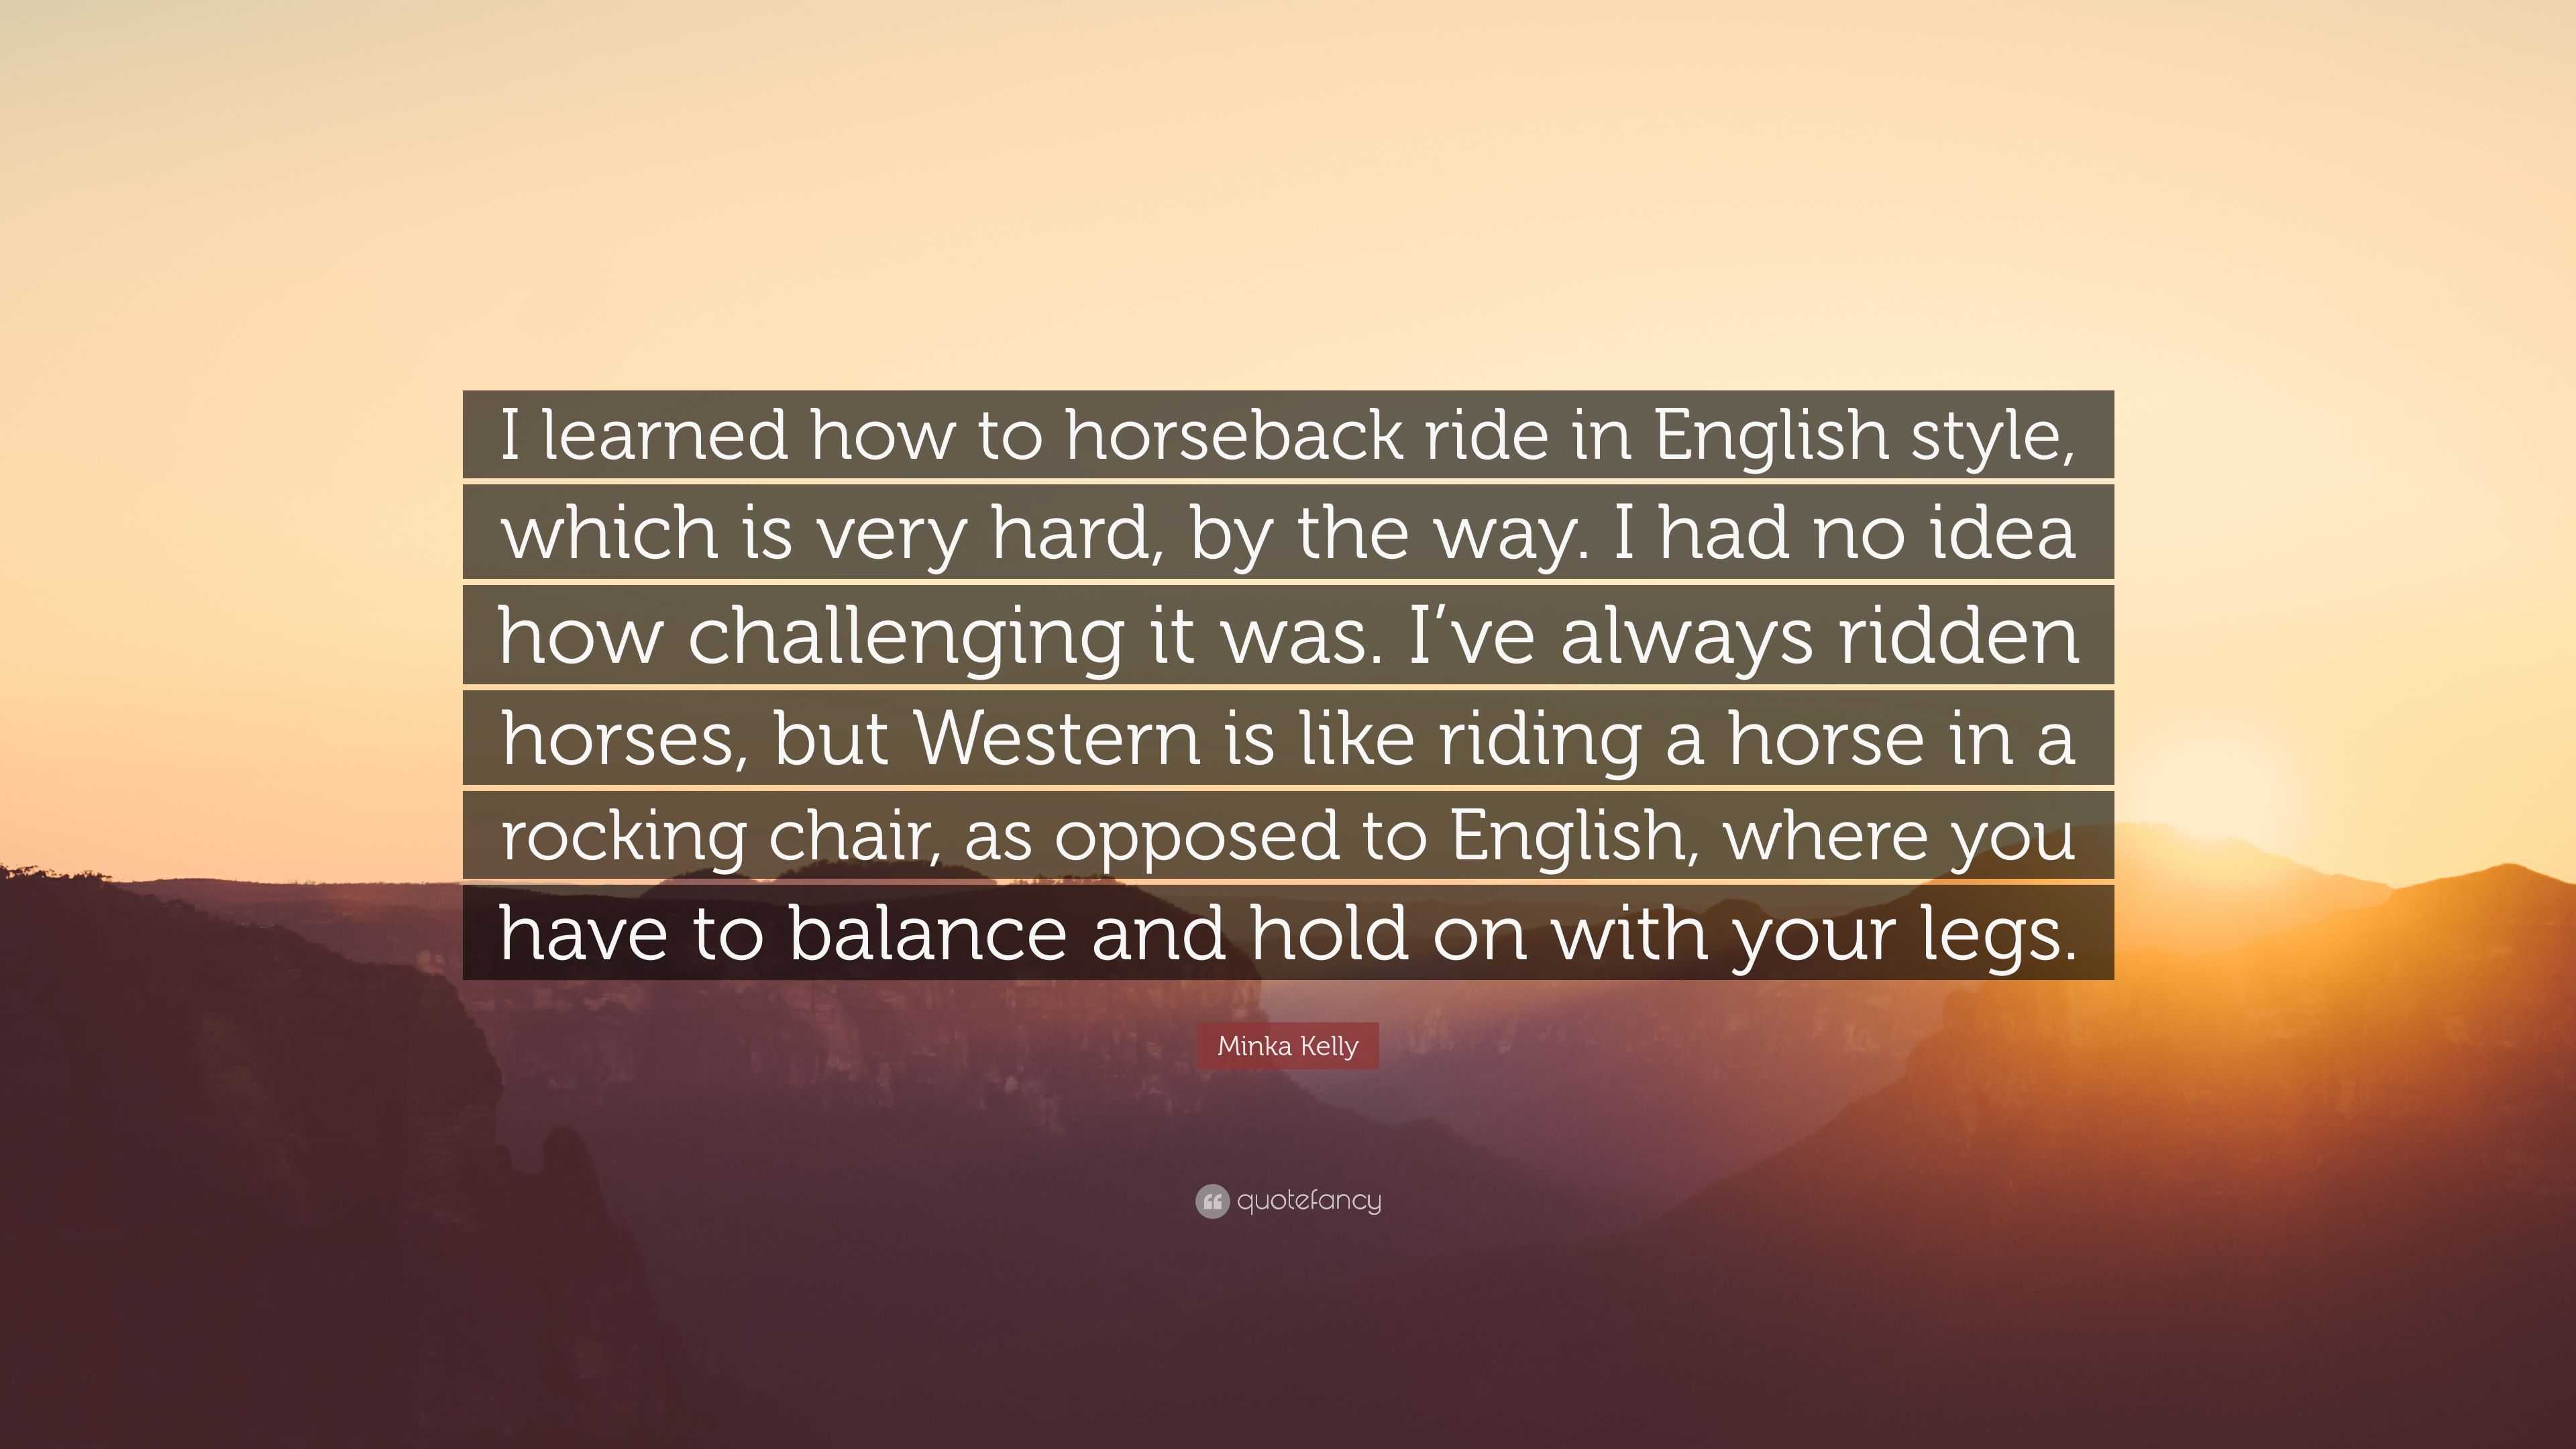 Minka Kelly Quote I Learned How To Horseback Ride In English Style Which Is Very Hard By The Way I Had No Idea How Challenging It Was